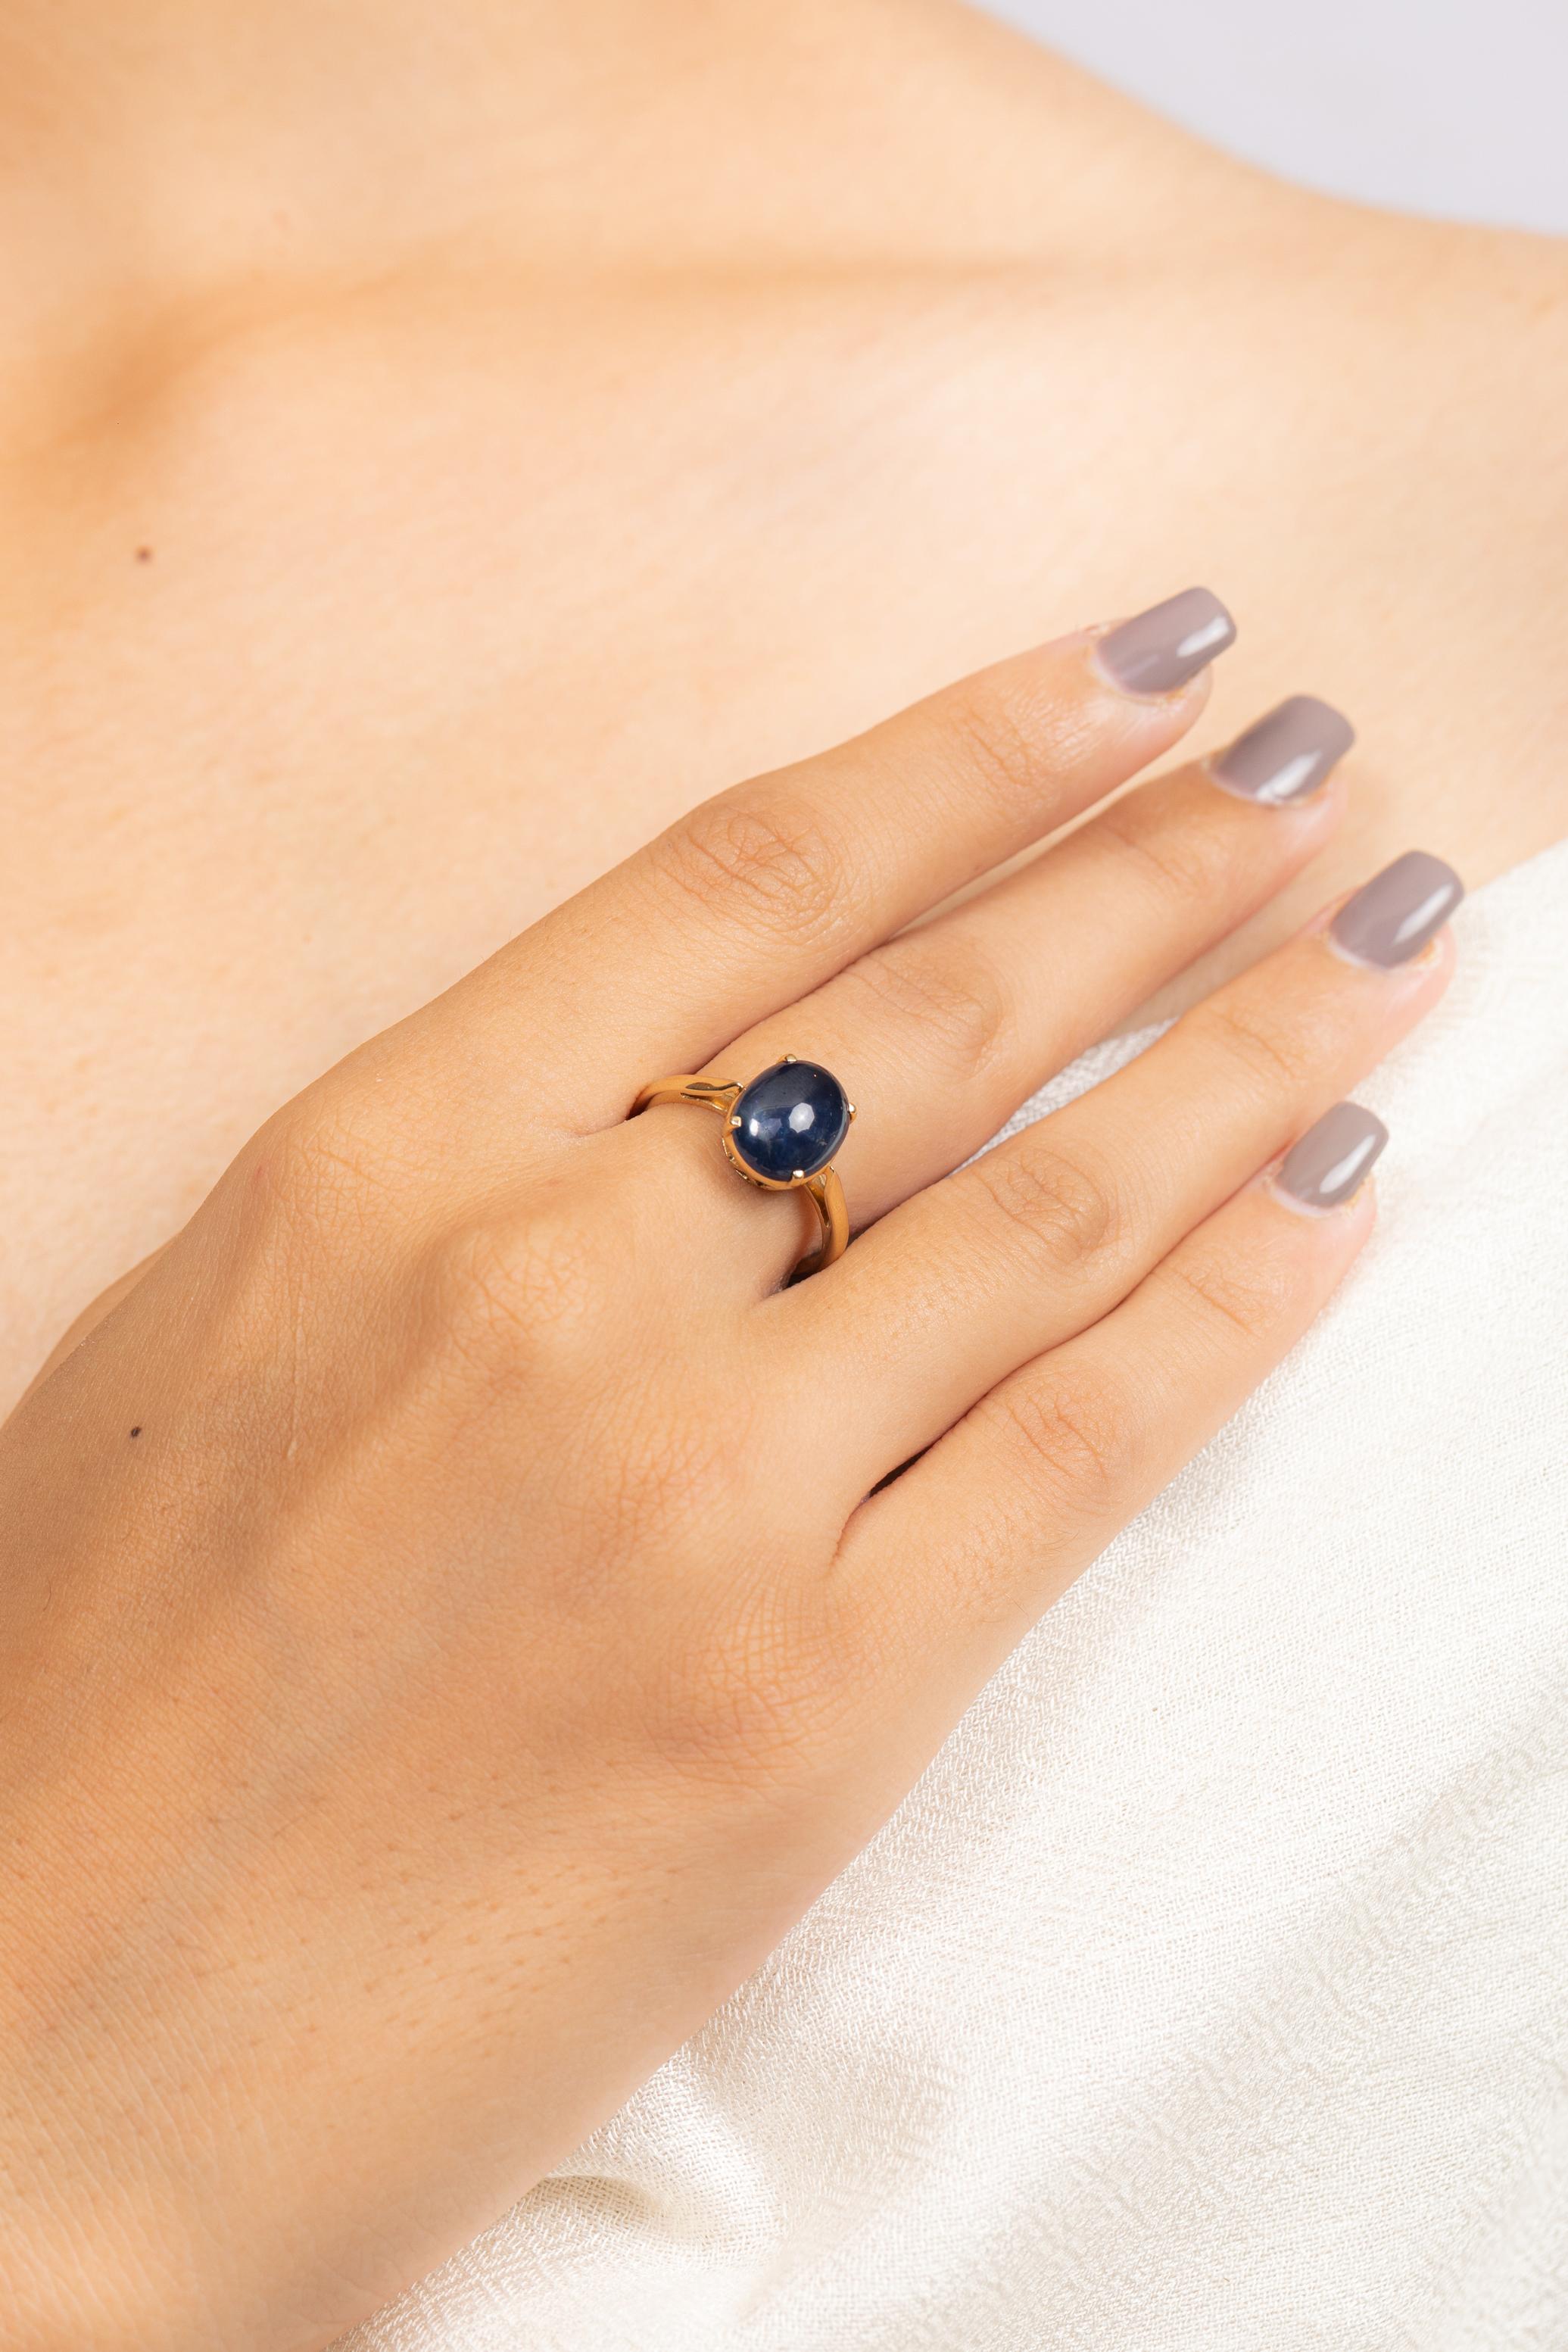 For Sale:  4.33 Carat Blue Sapphire Big Gemstone Ring in 14K Yellow Gold 6